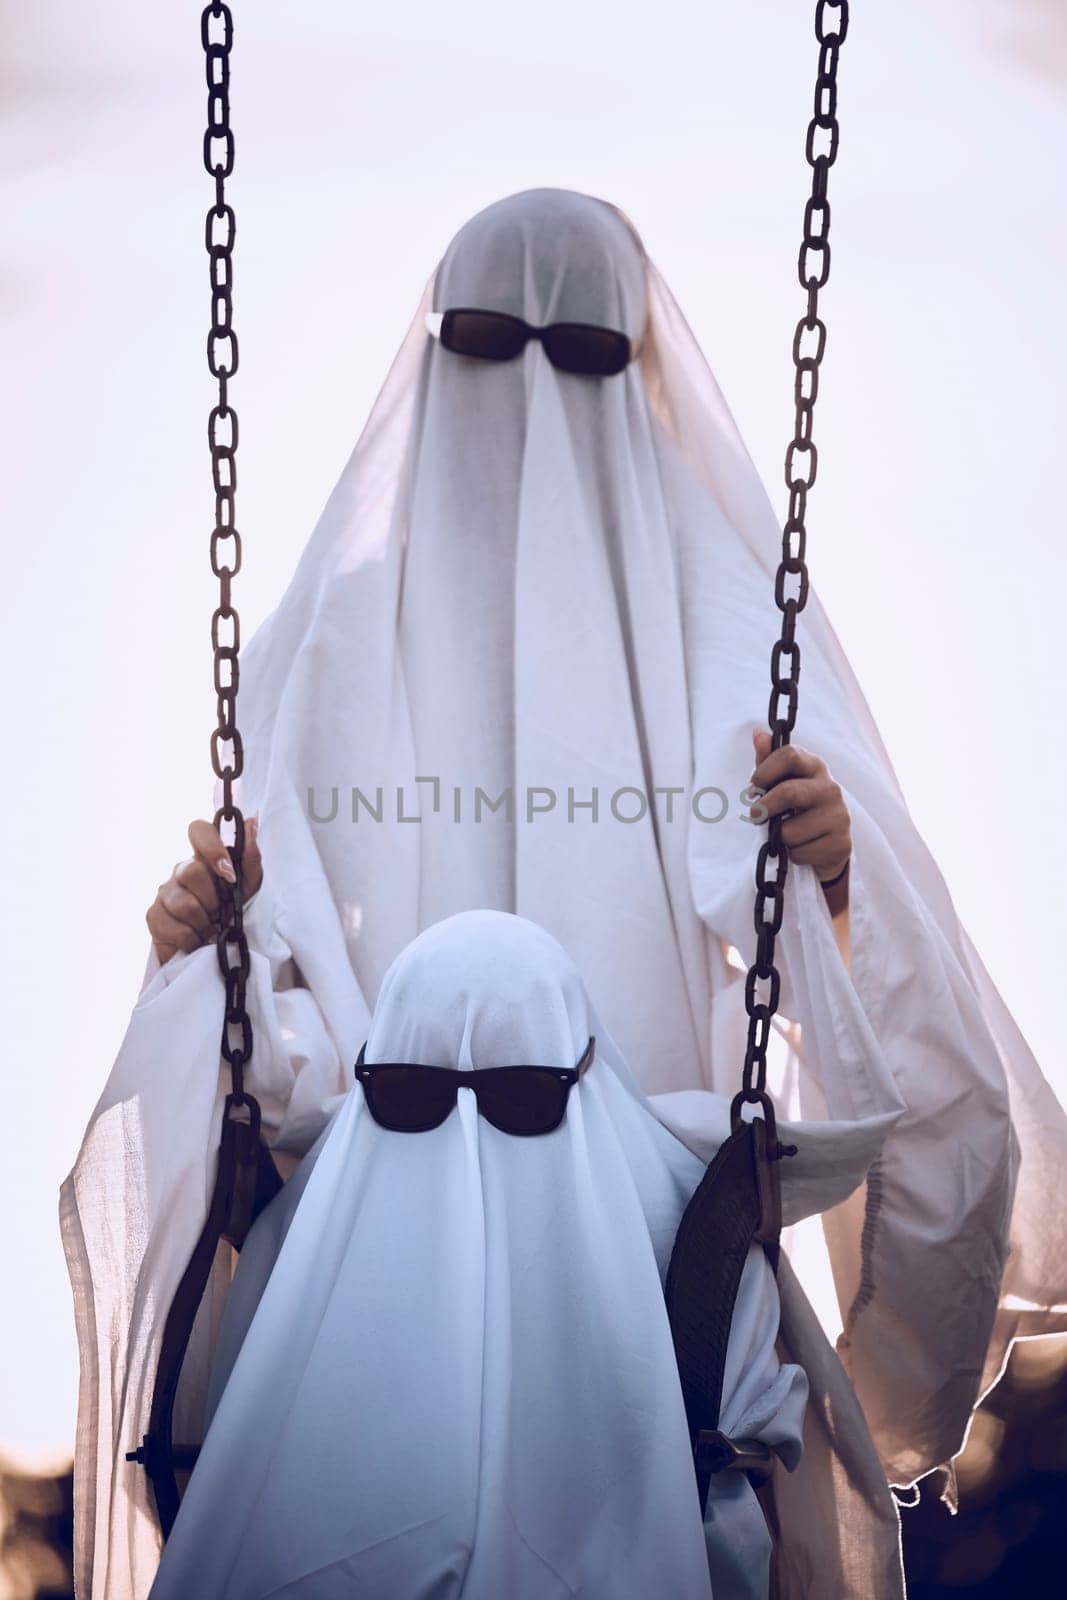 Halloween, ghost and family wearing white sheet and sunglasses costume at an outdoor park with child on a swing at playground. Horror, scary and celebrate fun holiday with creative woman and kid.